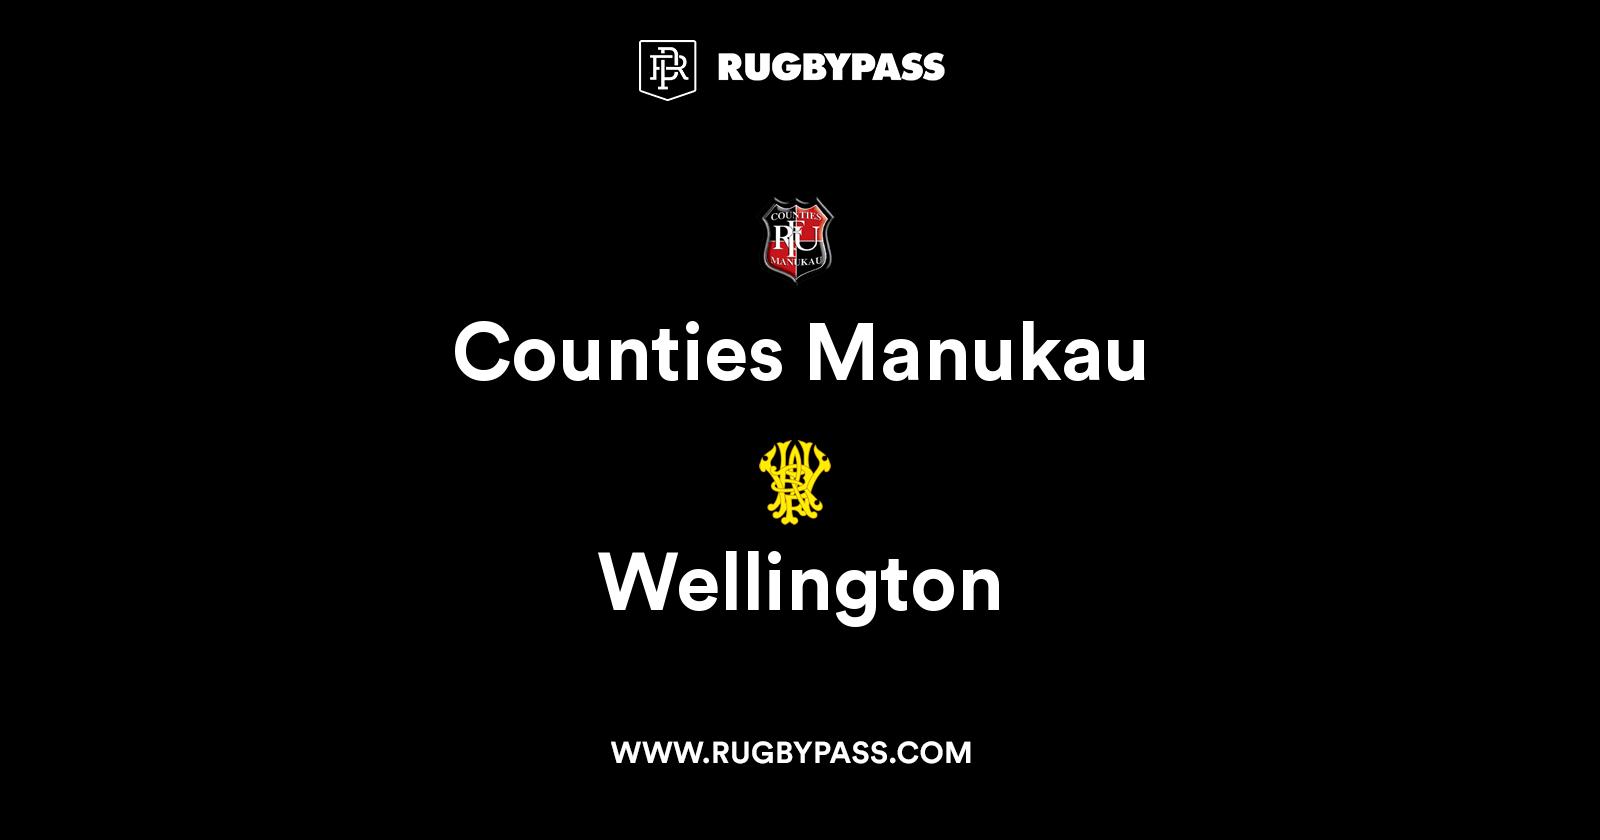 Counties Manukau vs Wellington Live and Latest Rugby Union Scores and Results RugbyPass